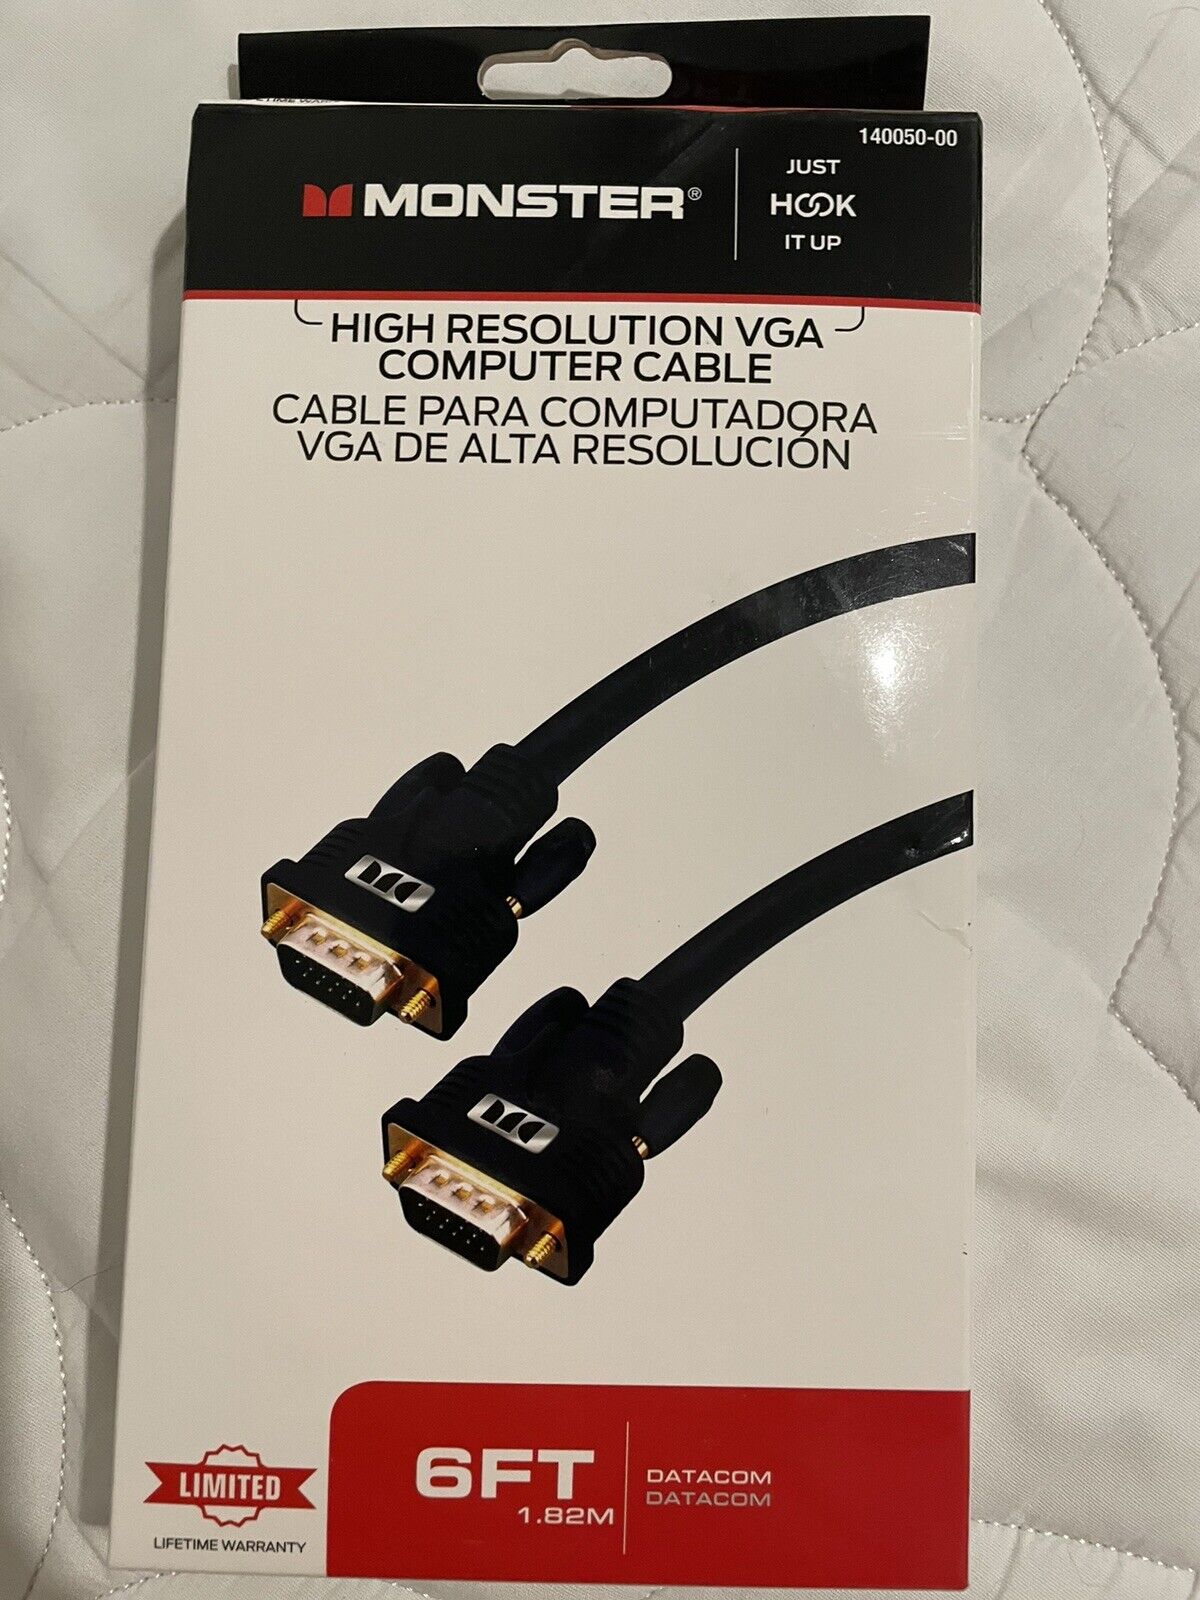 Monster 140050-00 Hi Res Computer Cable 6 Ft VGA